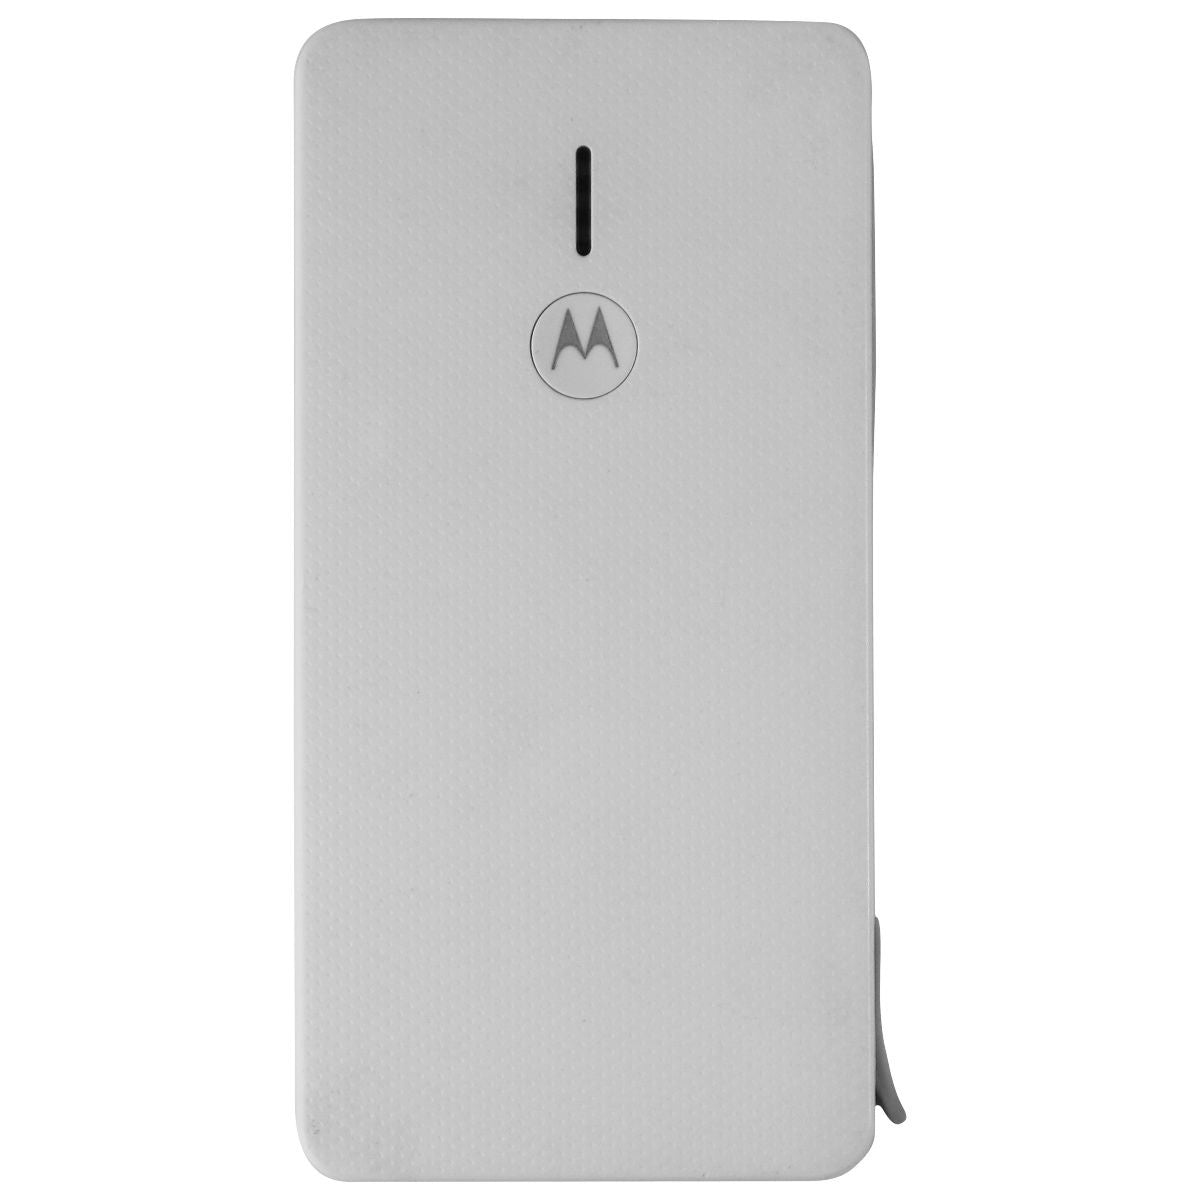 Motorola Power Pack 2000mAh USB Charger for Smartphones & More - White Cell Phone - Batteries Motorola    - Simple Cell Bulk Wholesale Pricing - USA Seller